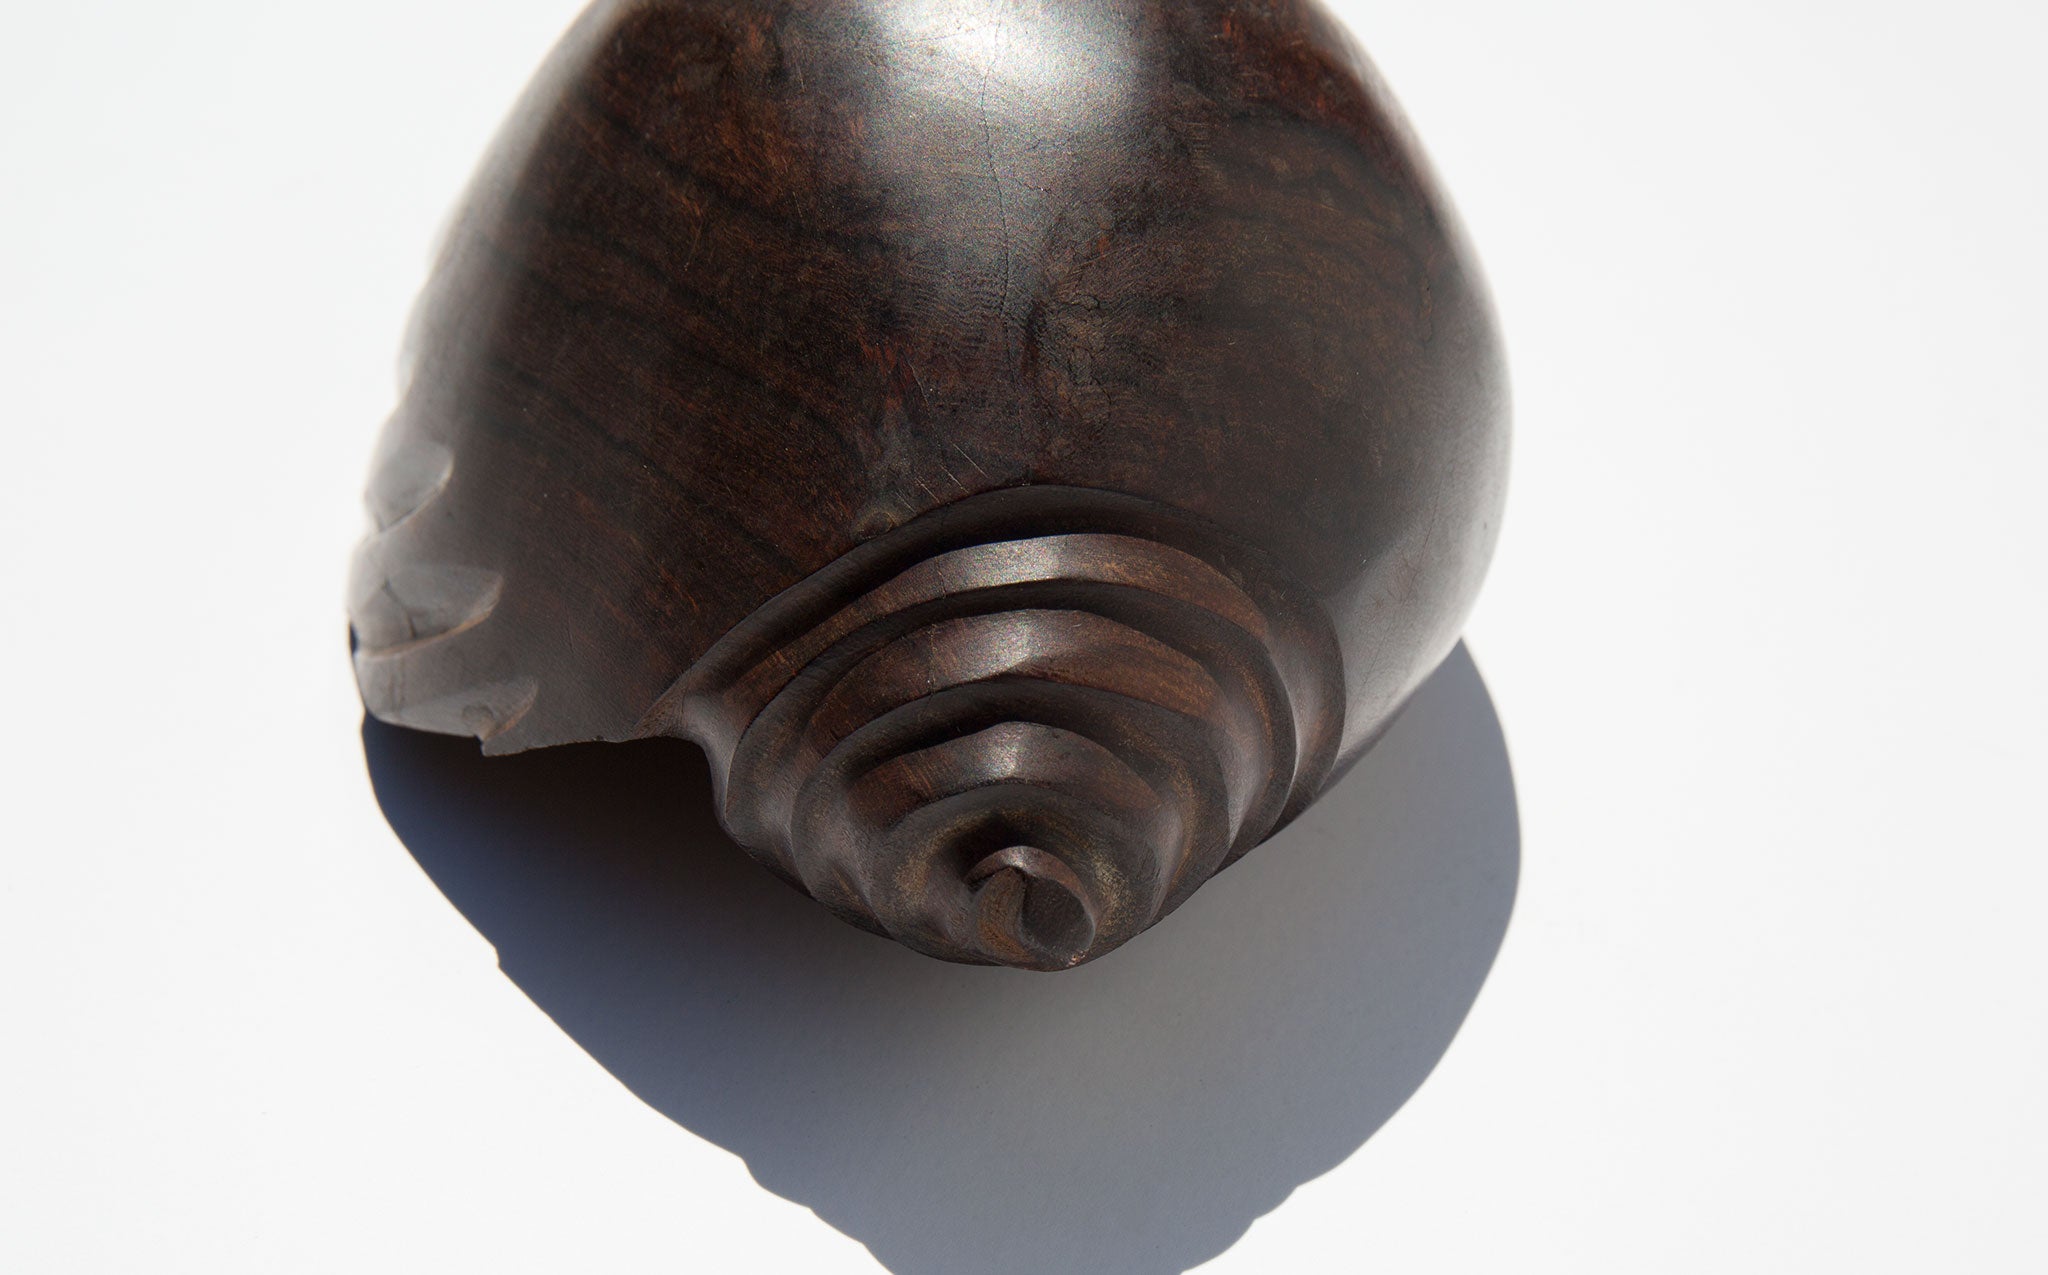 Carved Ironwood Conch Shell